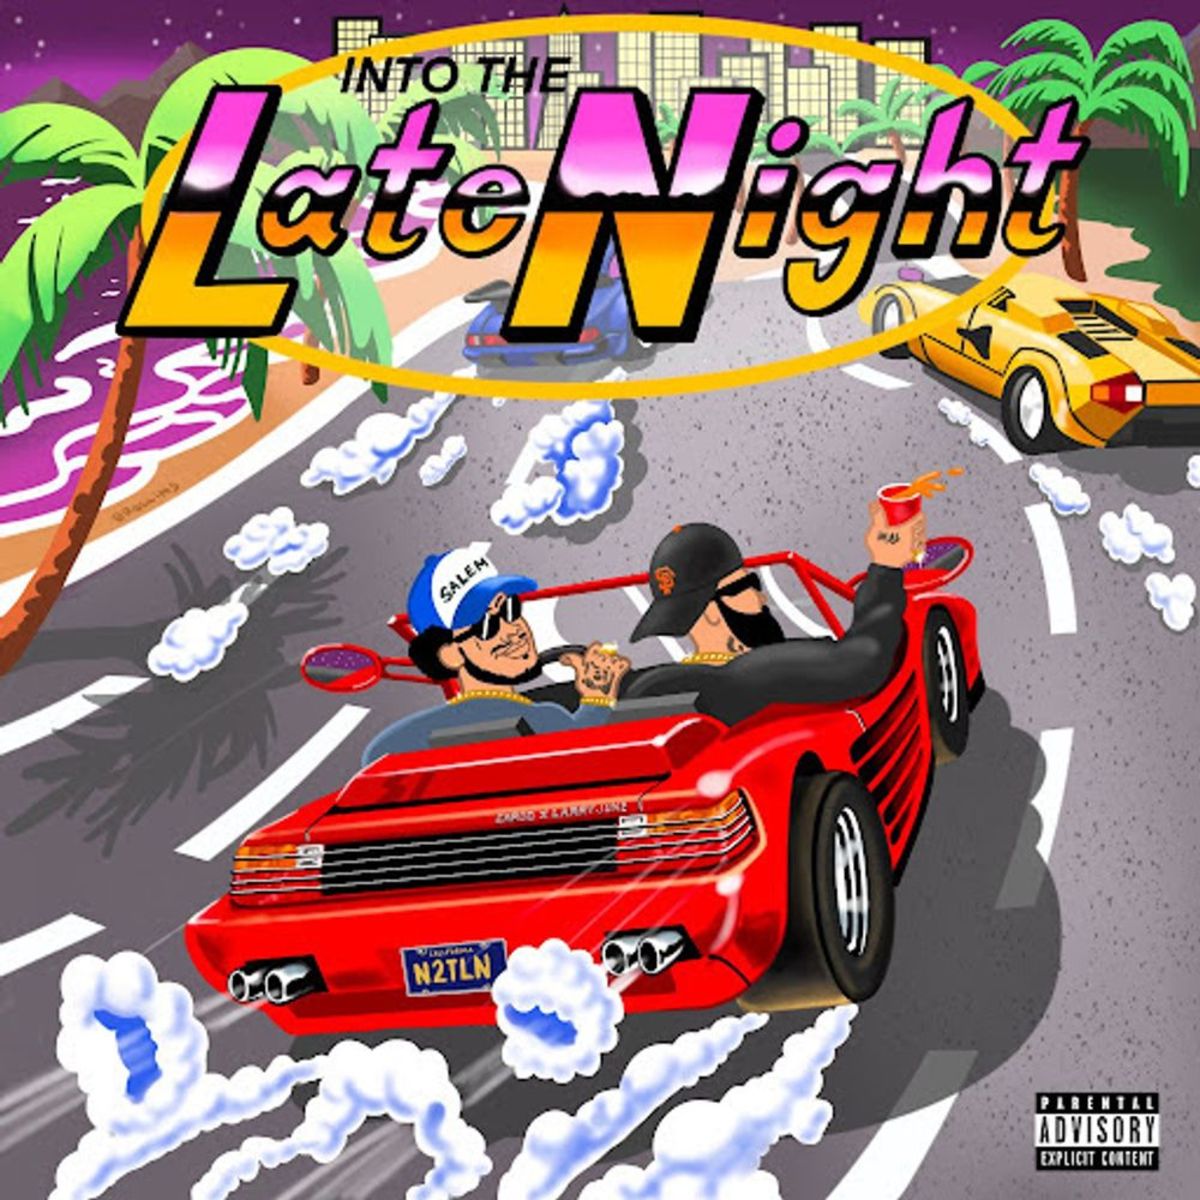 Listen to Larry June & Cardo’s New Mixtape ‘Into the Late Night’ Complex